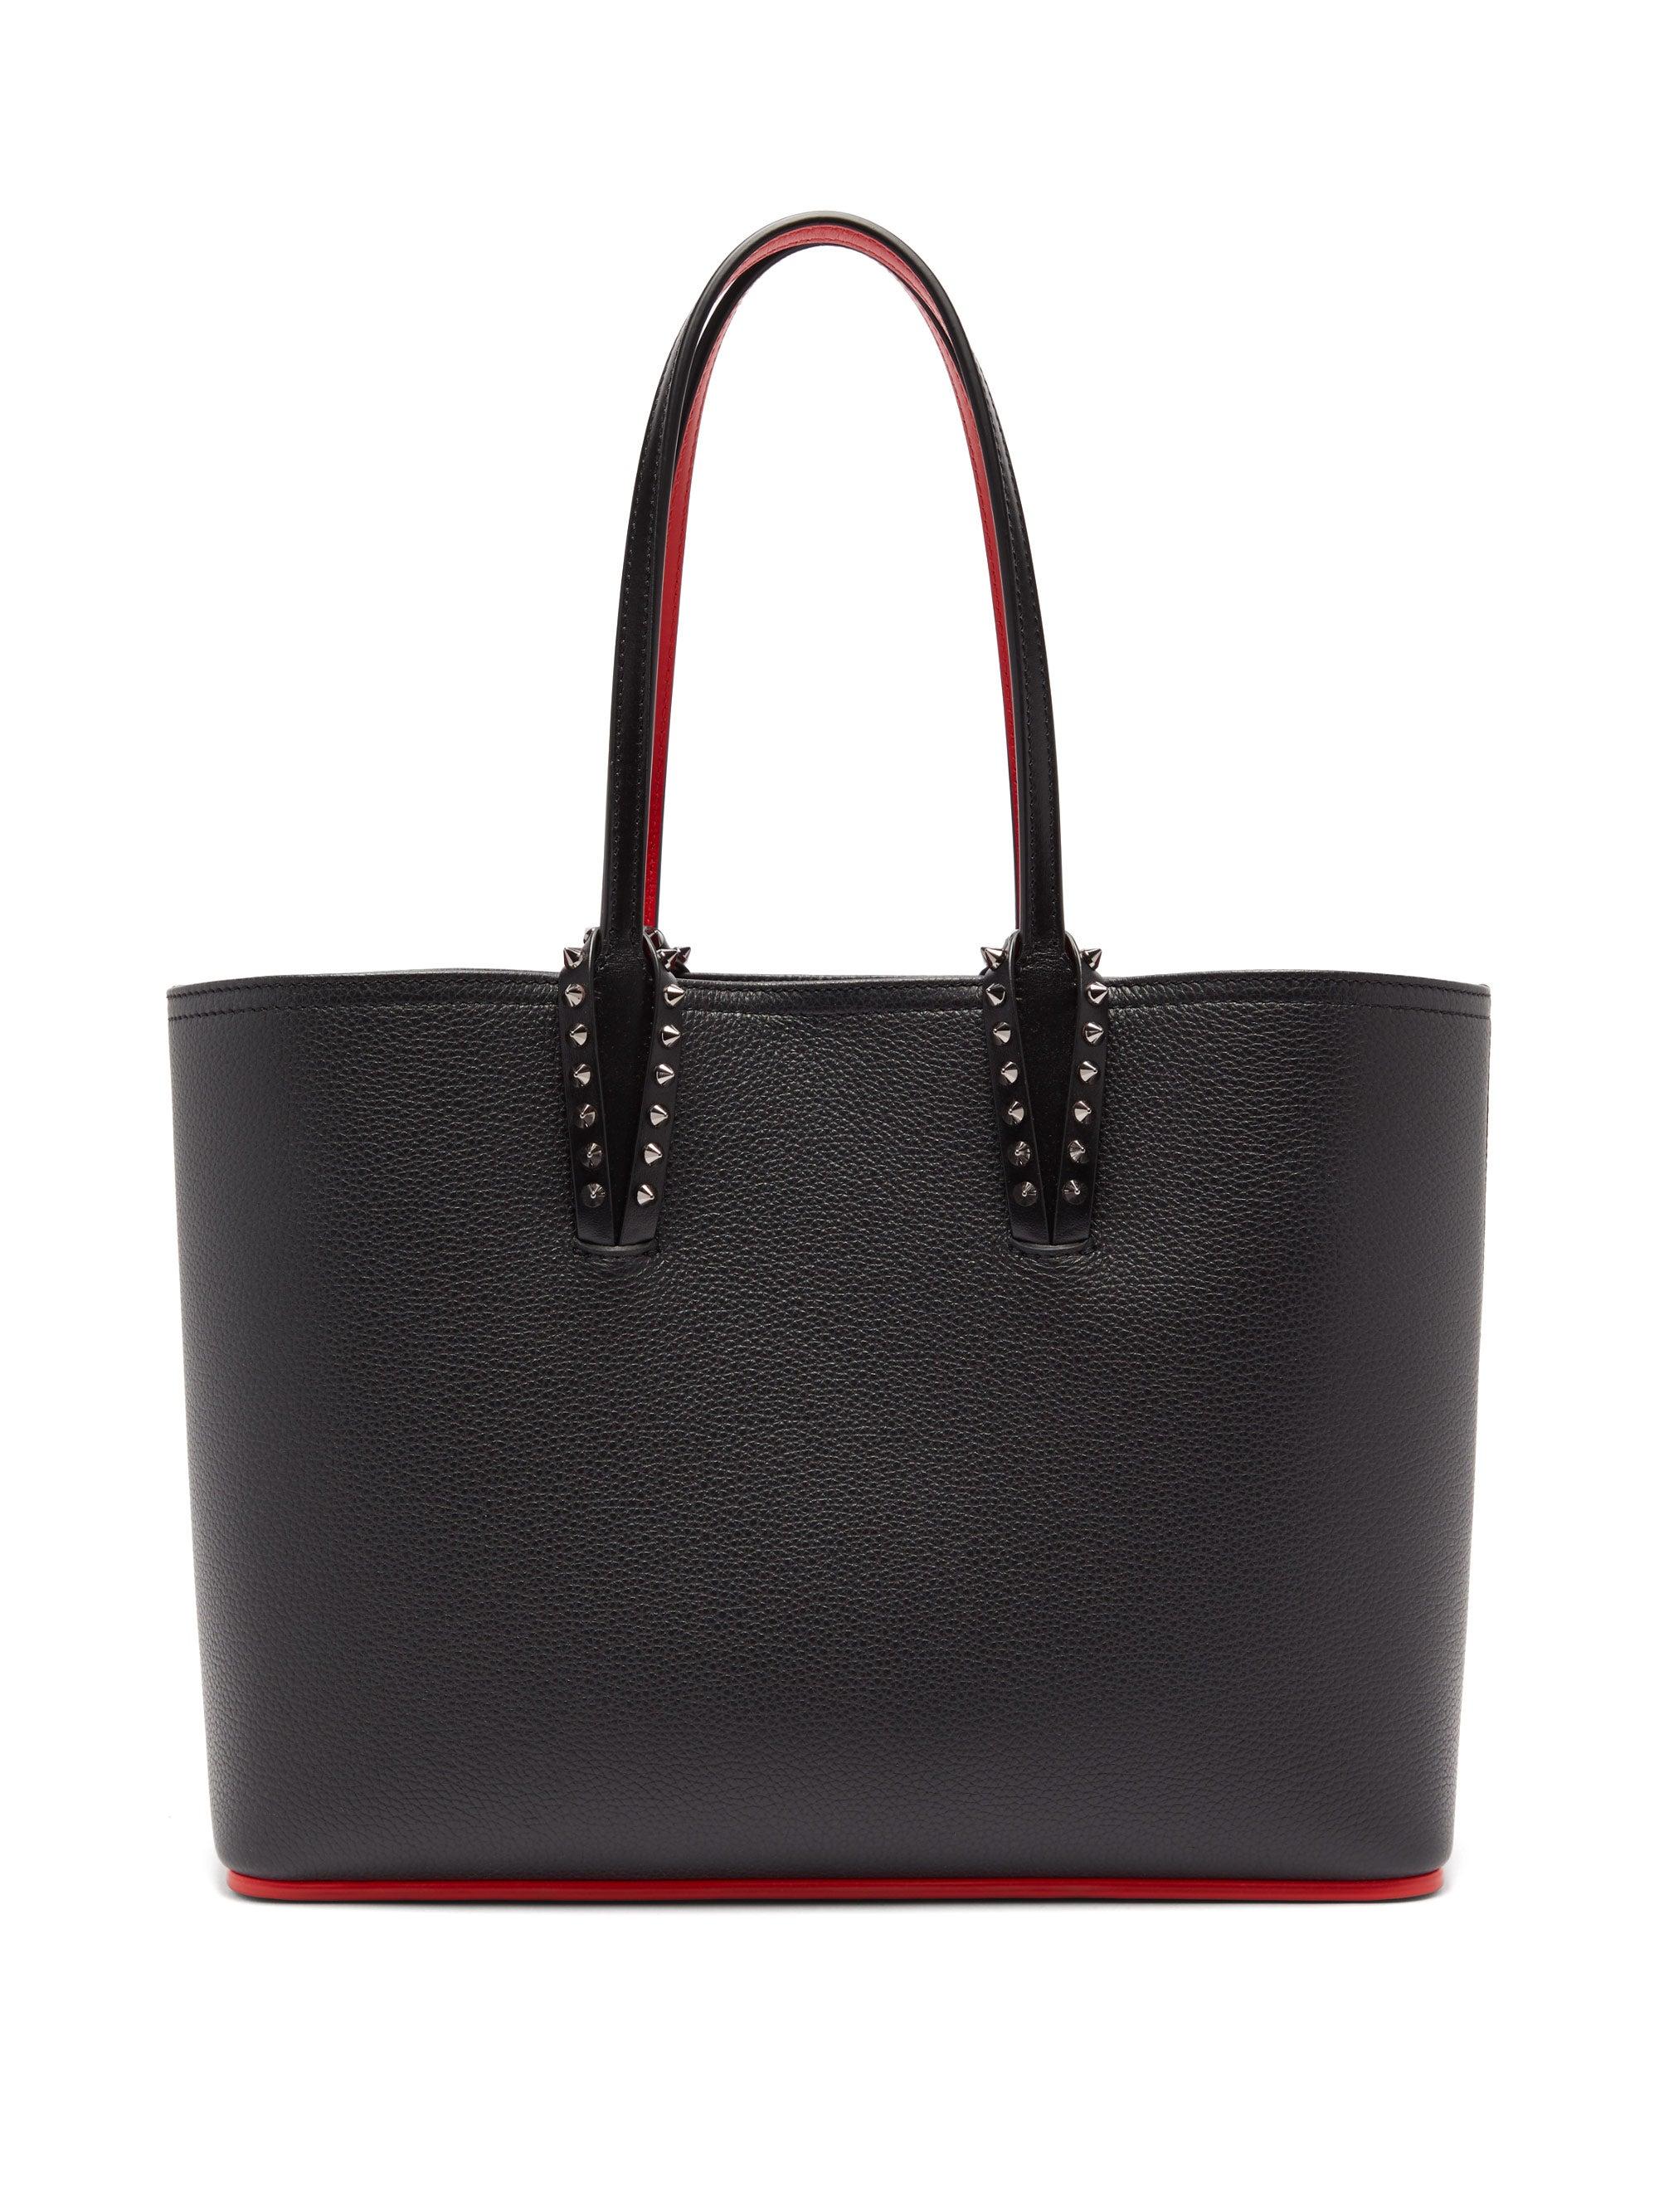 Christian Louboutin Cabata Small Spike-embellished Leather Tote Bag in ...